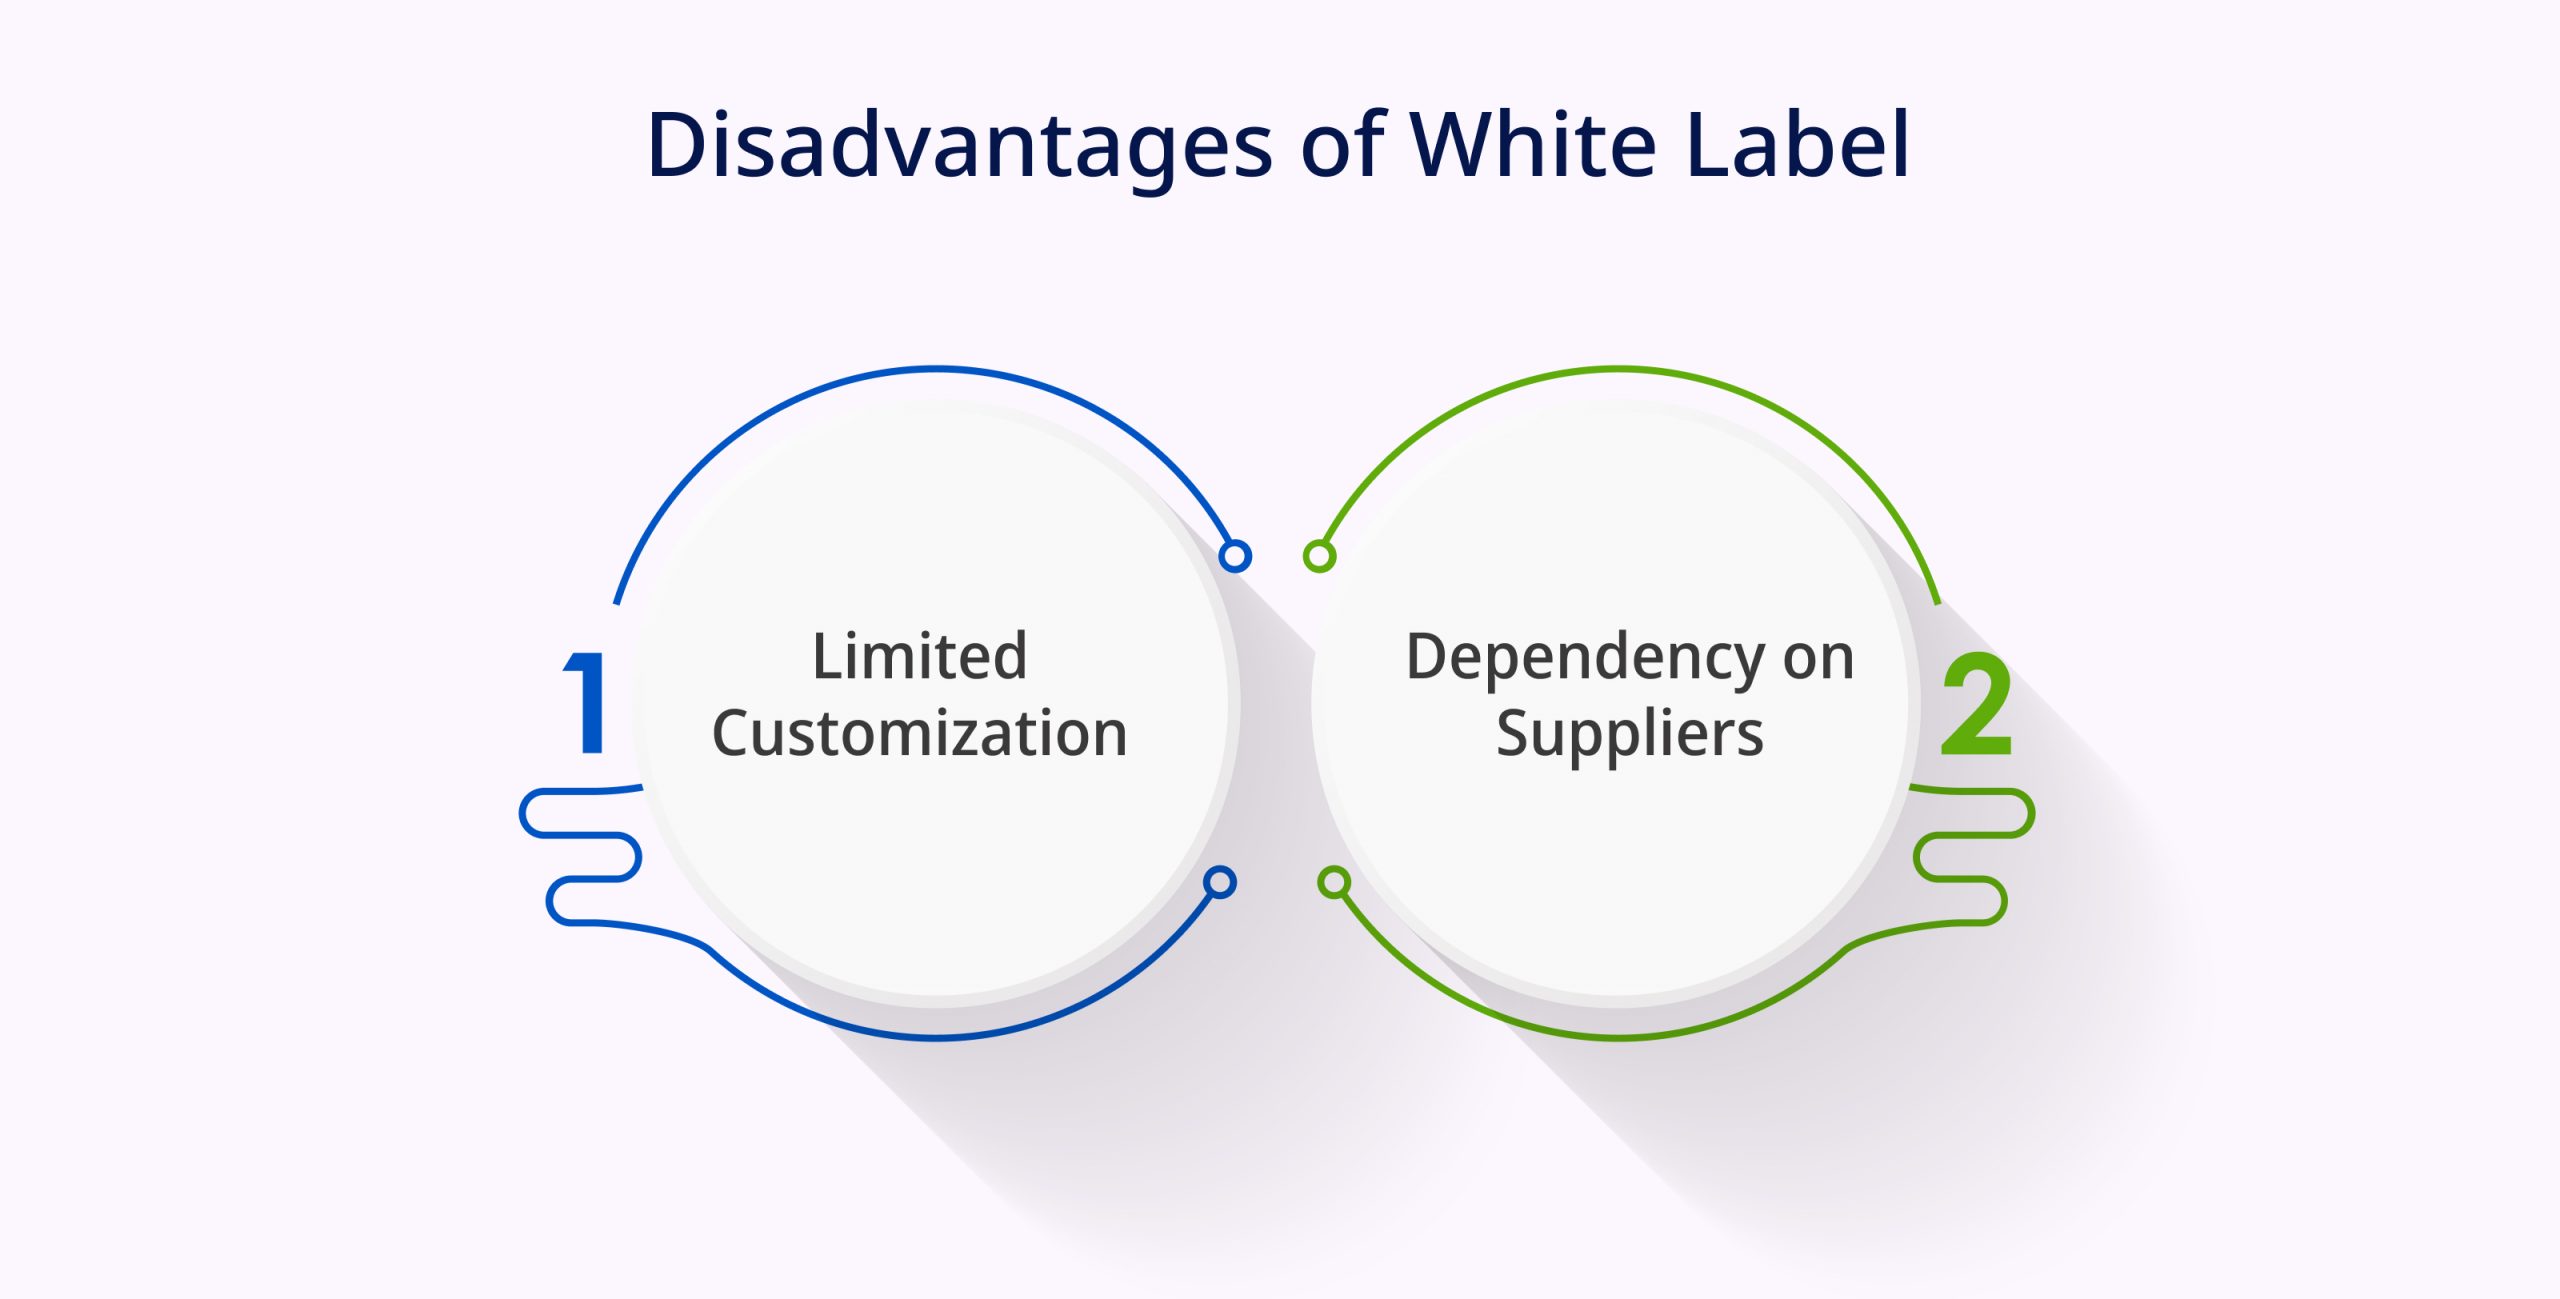 Disadvantages of White Label